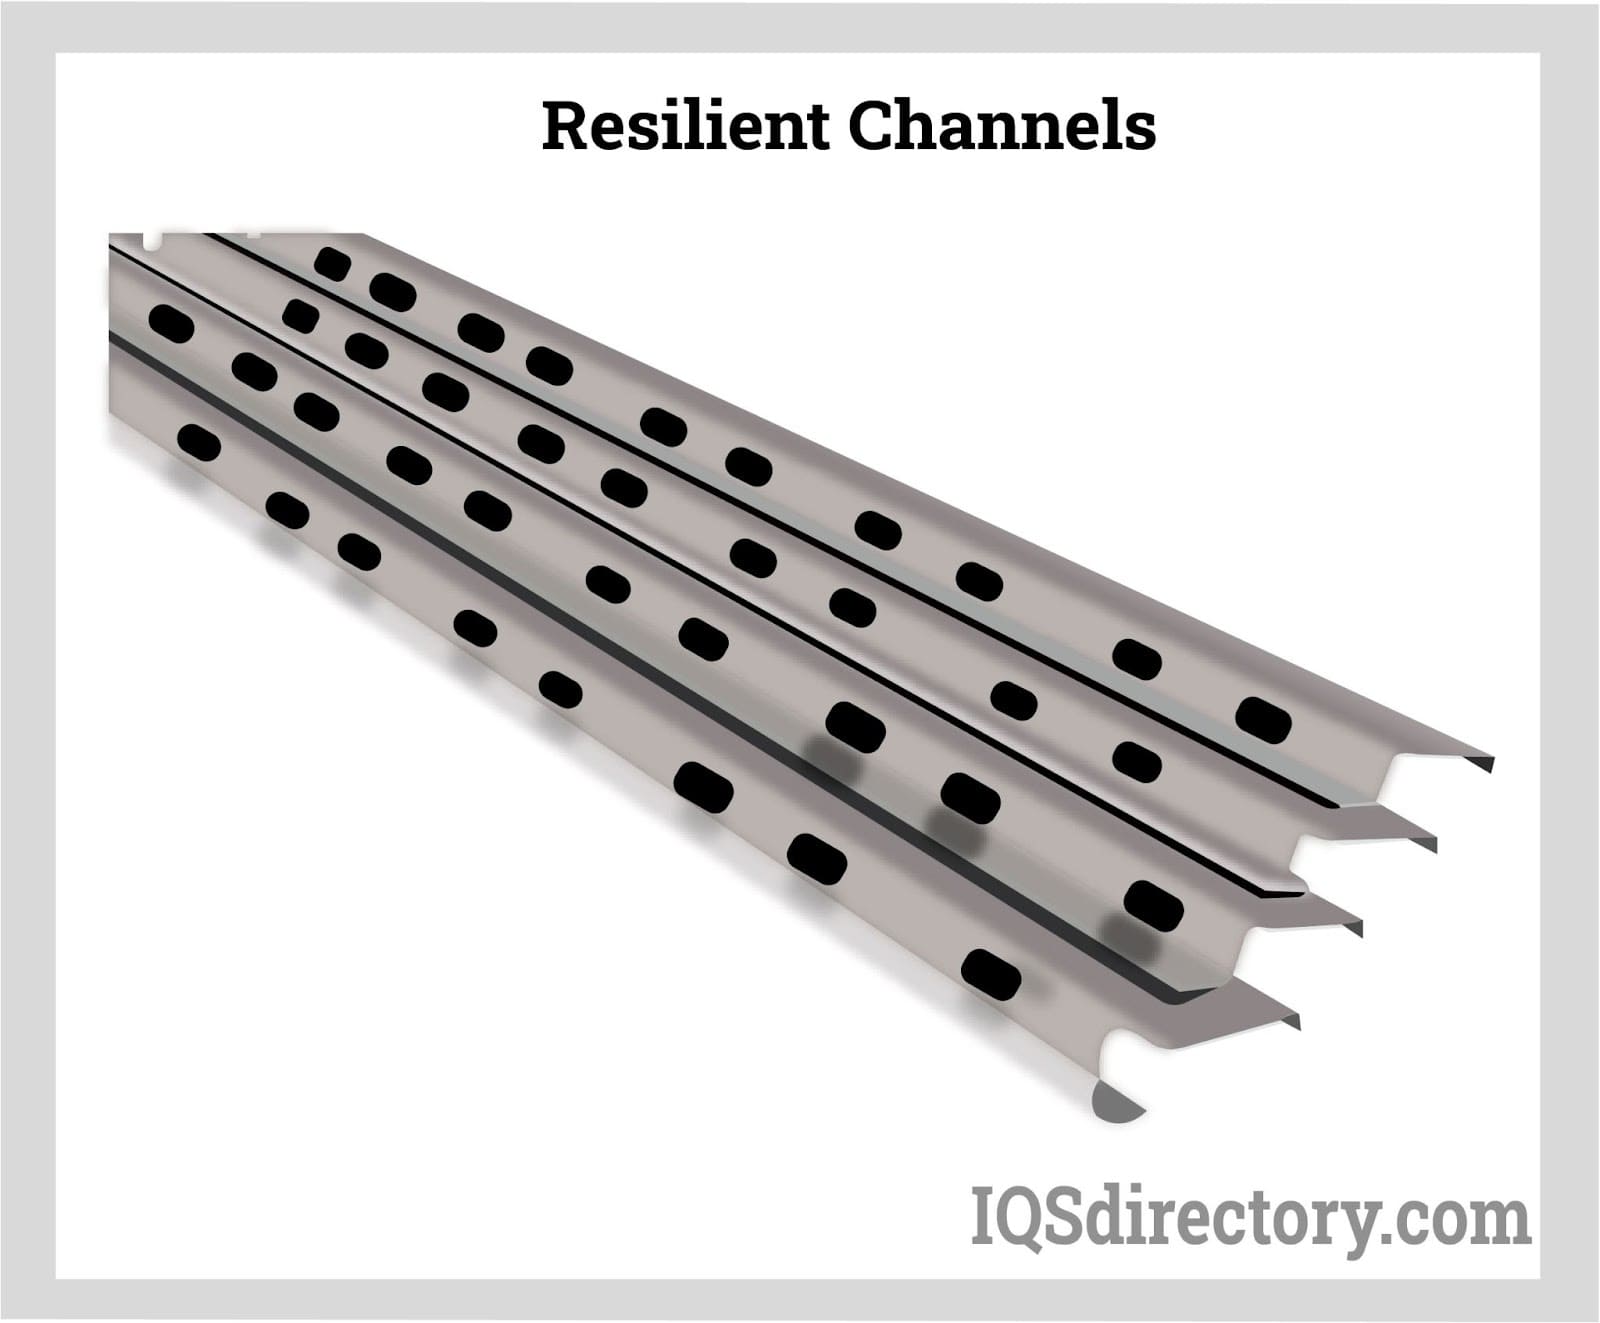 Resilient Channels